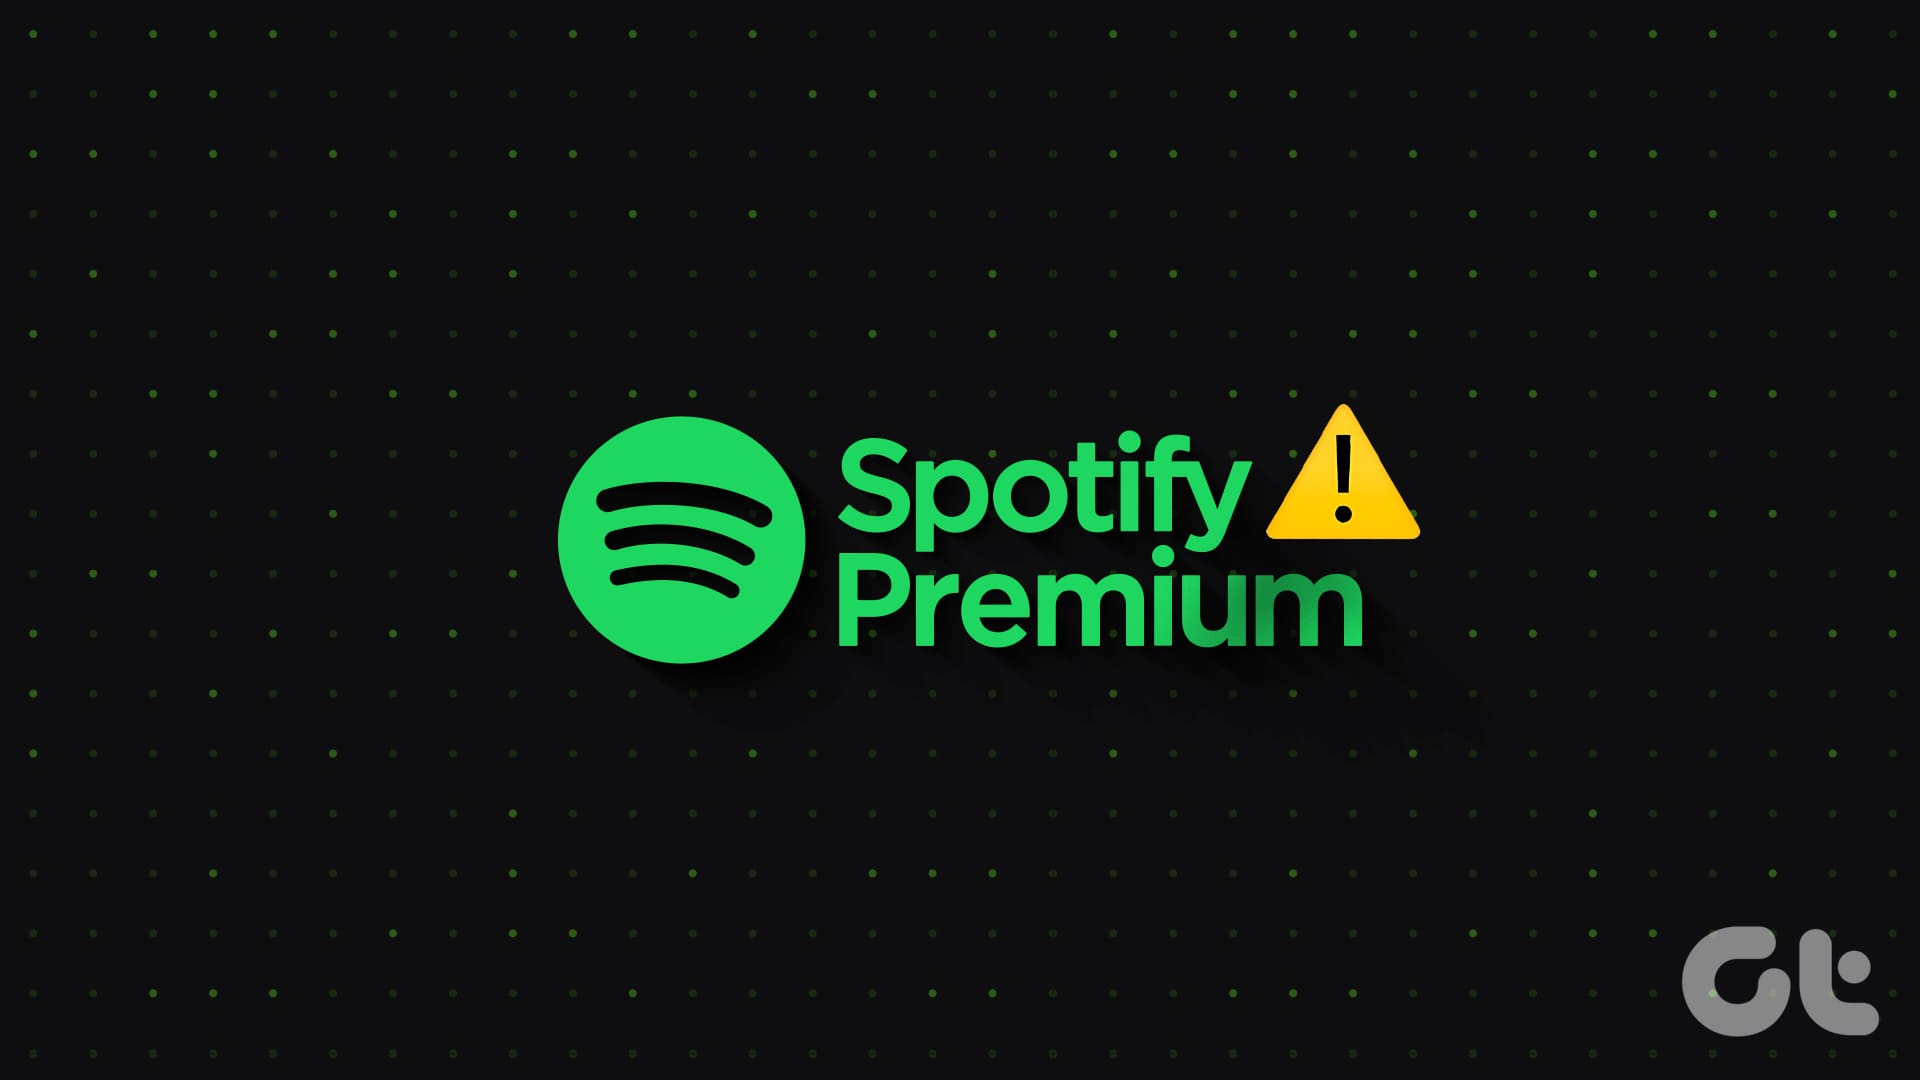 https://www.guidingtech.com/wp-content/uploads/How-to-Fix-Spotify-Premium-Not-Working-Offline-on-Android-and-iPhone.jpg